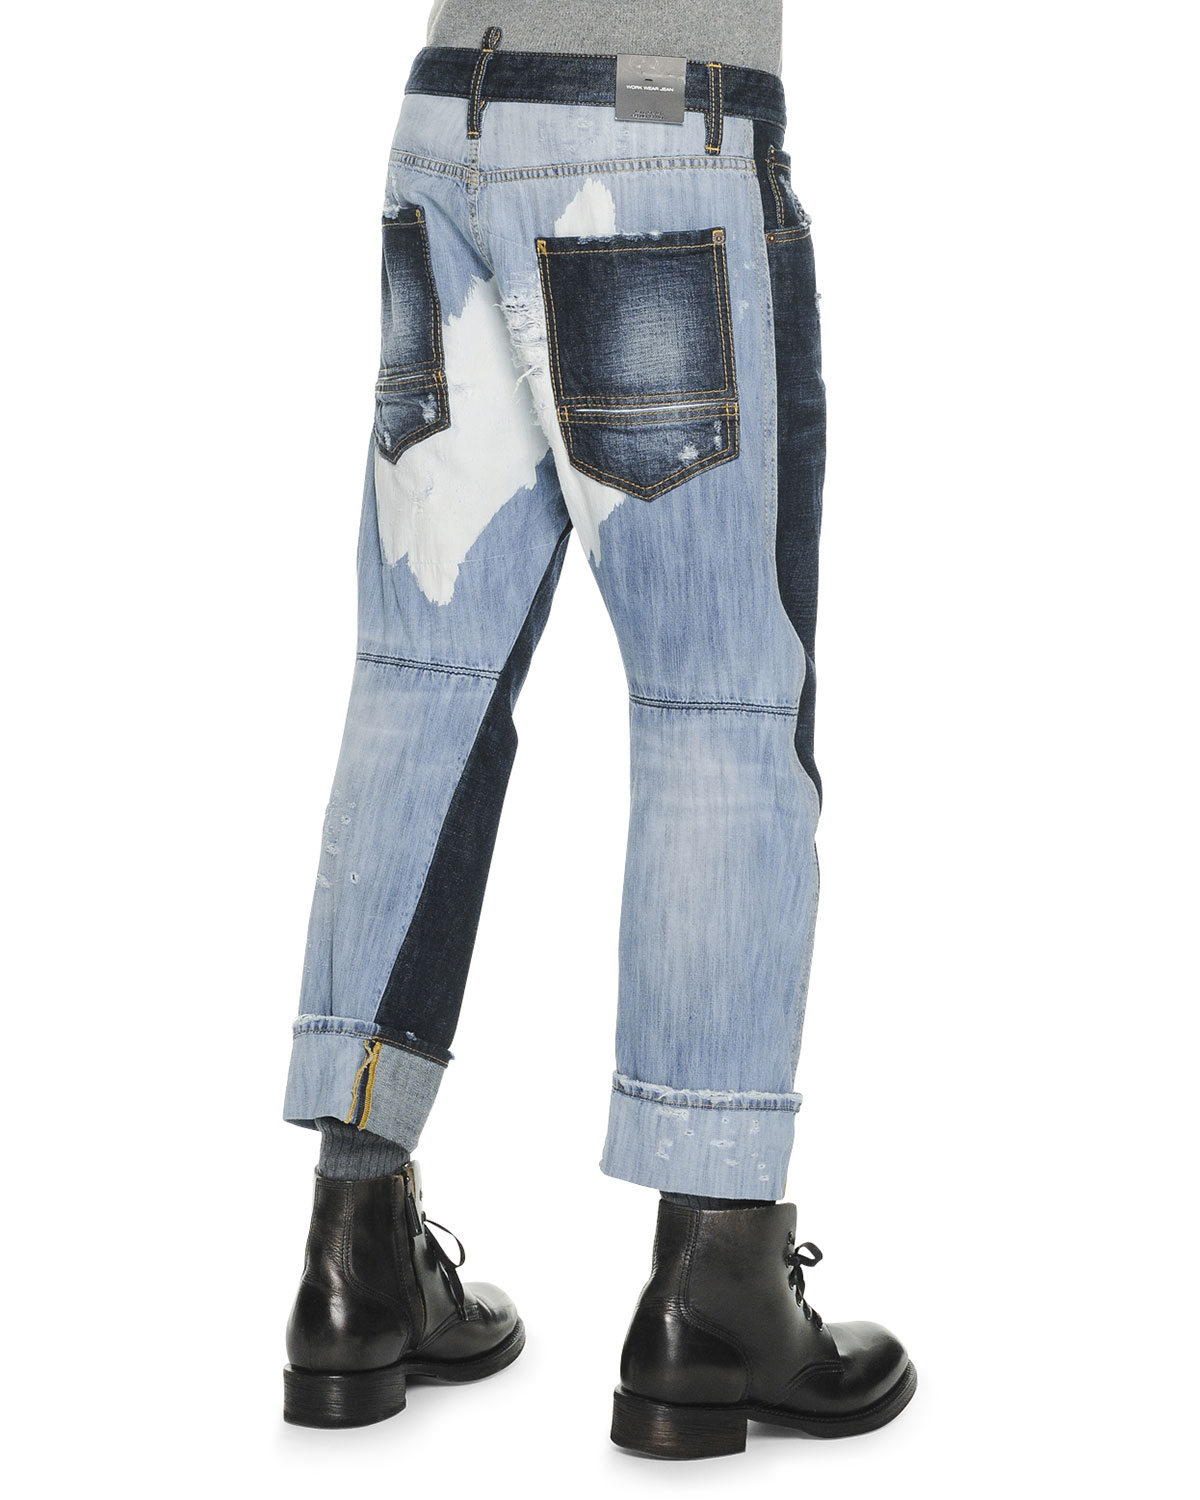 Lyst - Dsquared² Two-Tone Workwear Jeans in Blue for Men